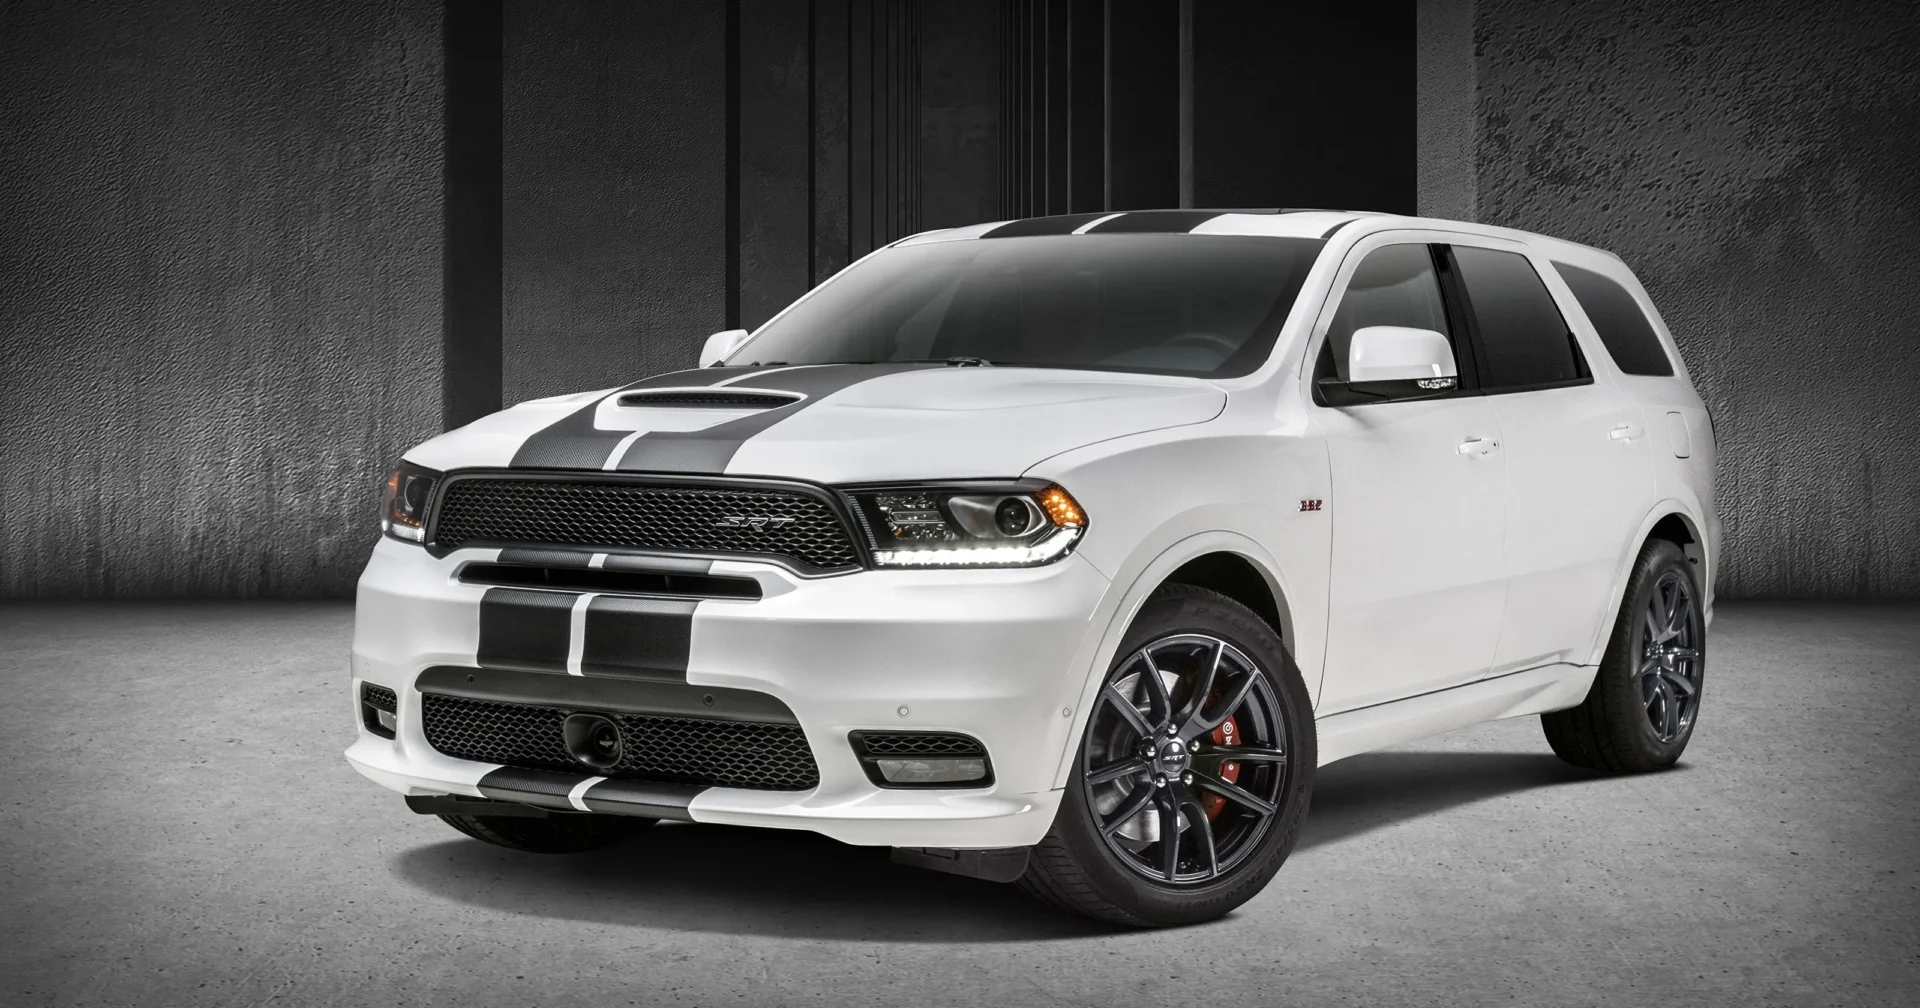 A white dodge durango parked in front of a building.